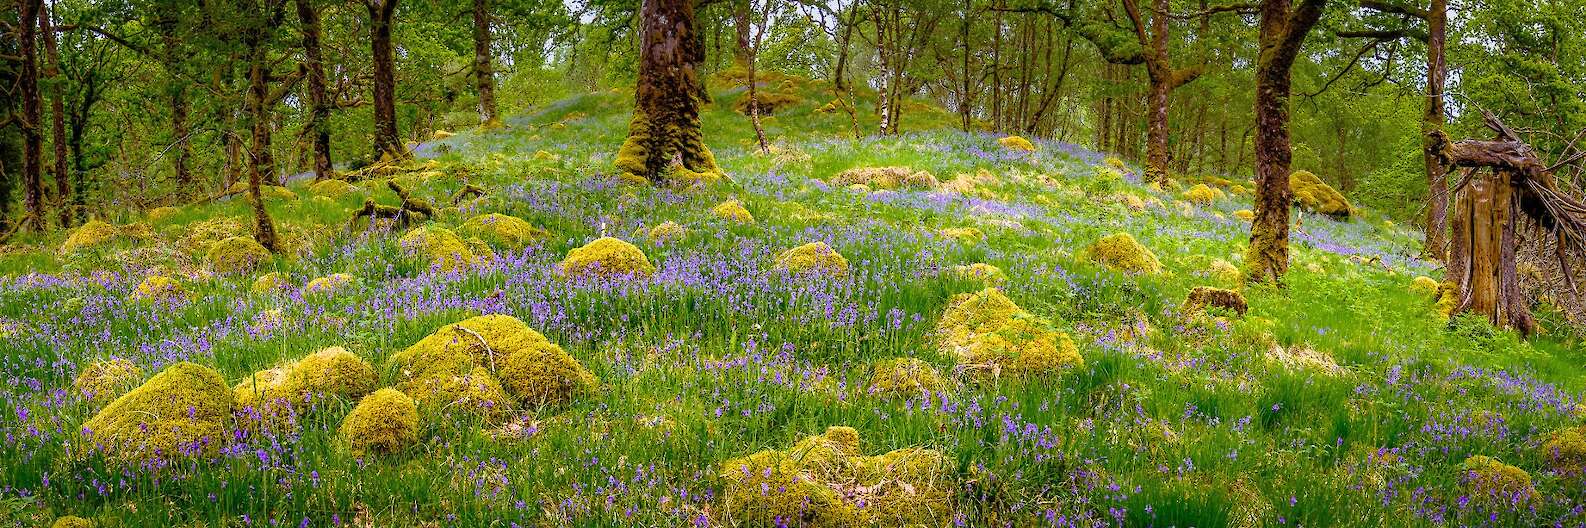 Bluebells in Ariundle Oakwood | Courtesy of Steven Marshall Photography - www.smarshall-photography.com